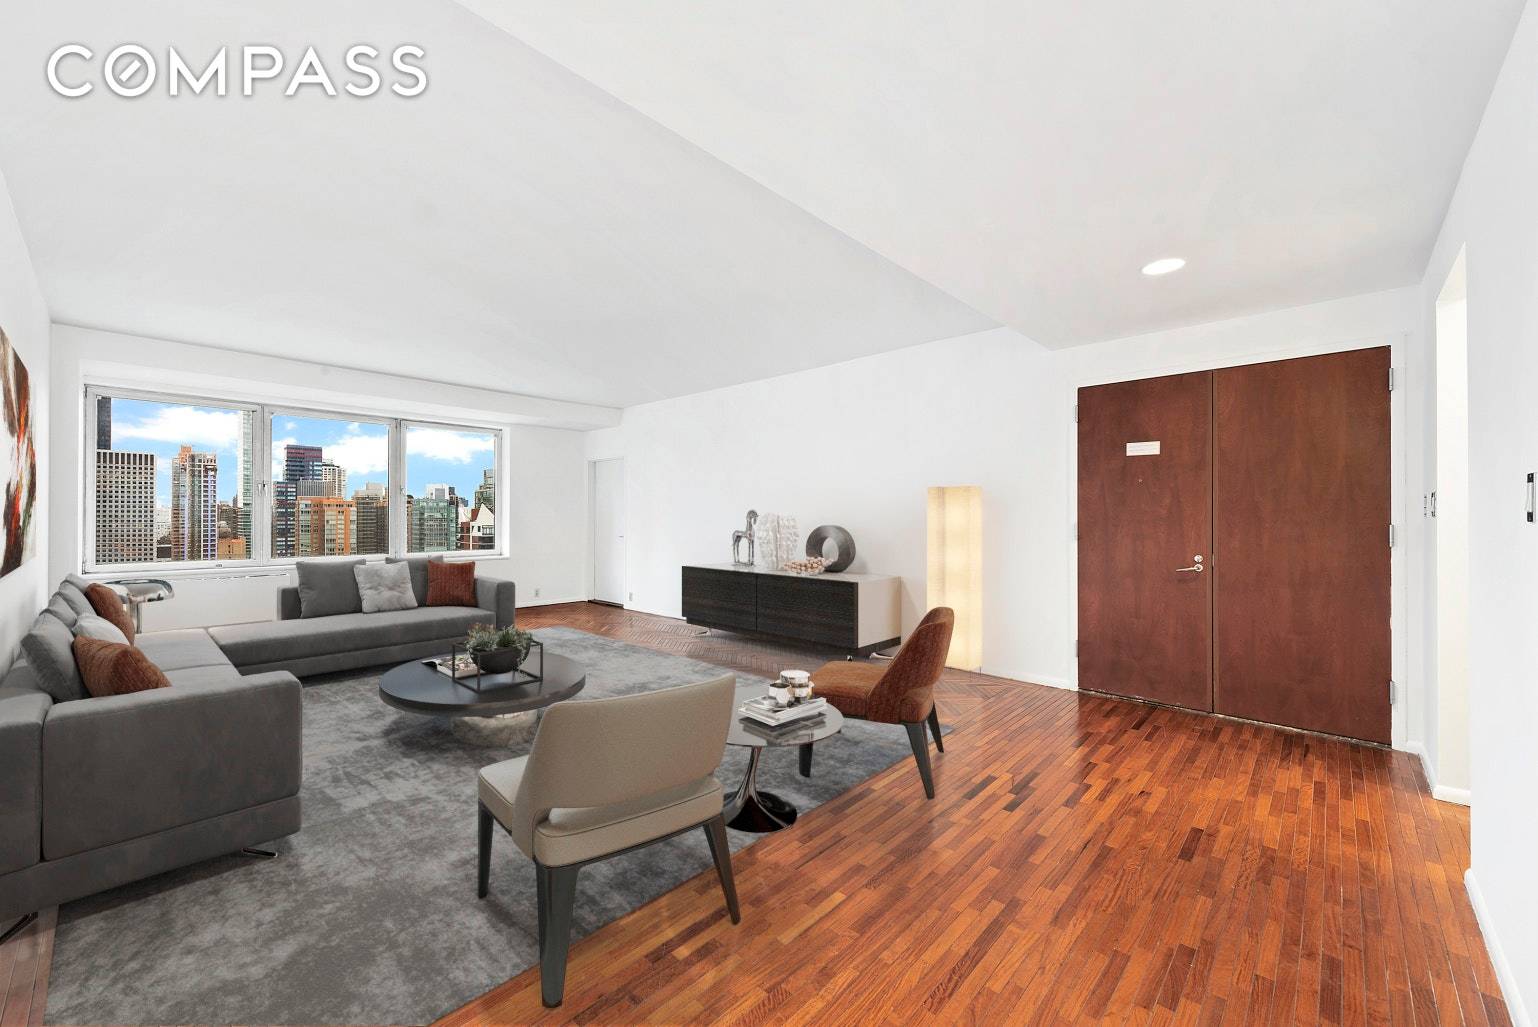 Space, privacy and luxury abound in this high floor three bedroom, two and a half bathroom showplace in The Octavia one of Midtown East Turtle Bay's most coveted white glove ...